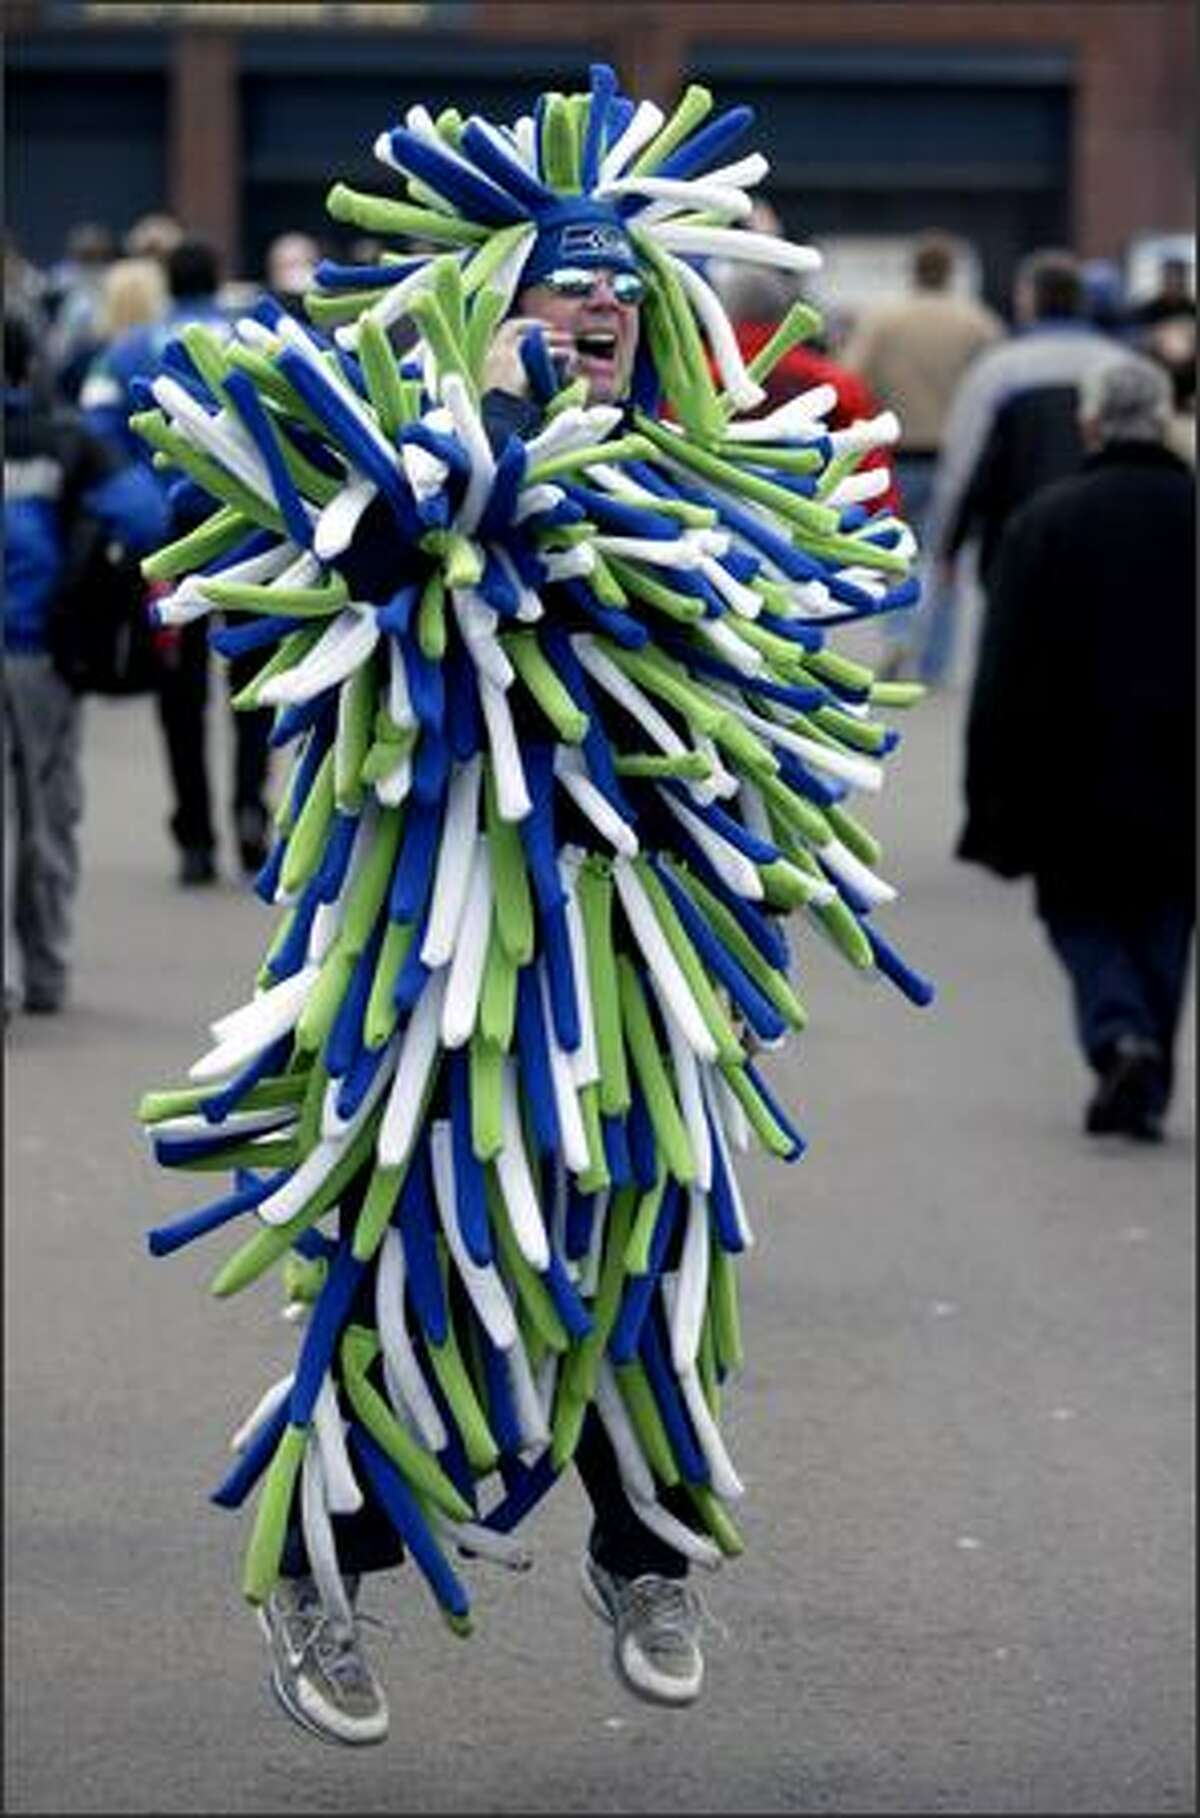 Seahawks fan Mark Williams of Puyallup jumps up in a handmade outfit as he tries to get a friend's attention prior to the NFC Championship Game between the Hawks and the Carolina Panthers. The Seahawks won 34-14 to advance to the Super Bowl against the Pittsburgh Steelers.